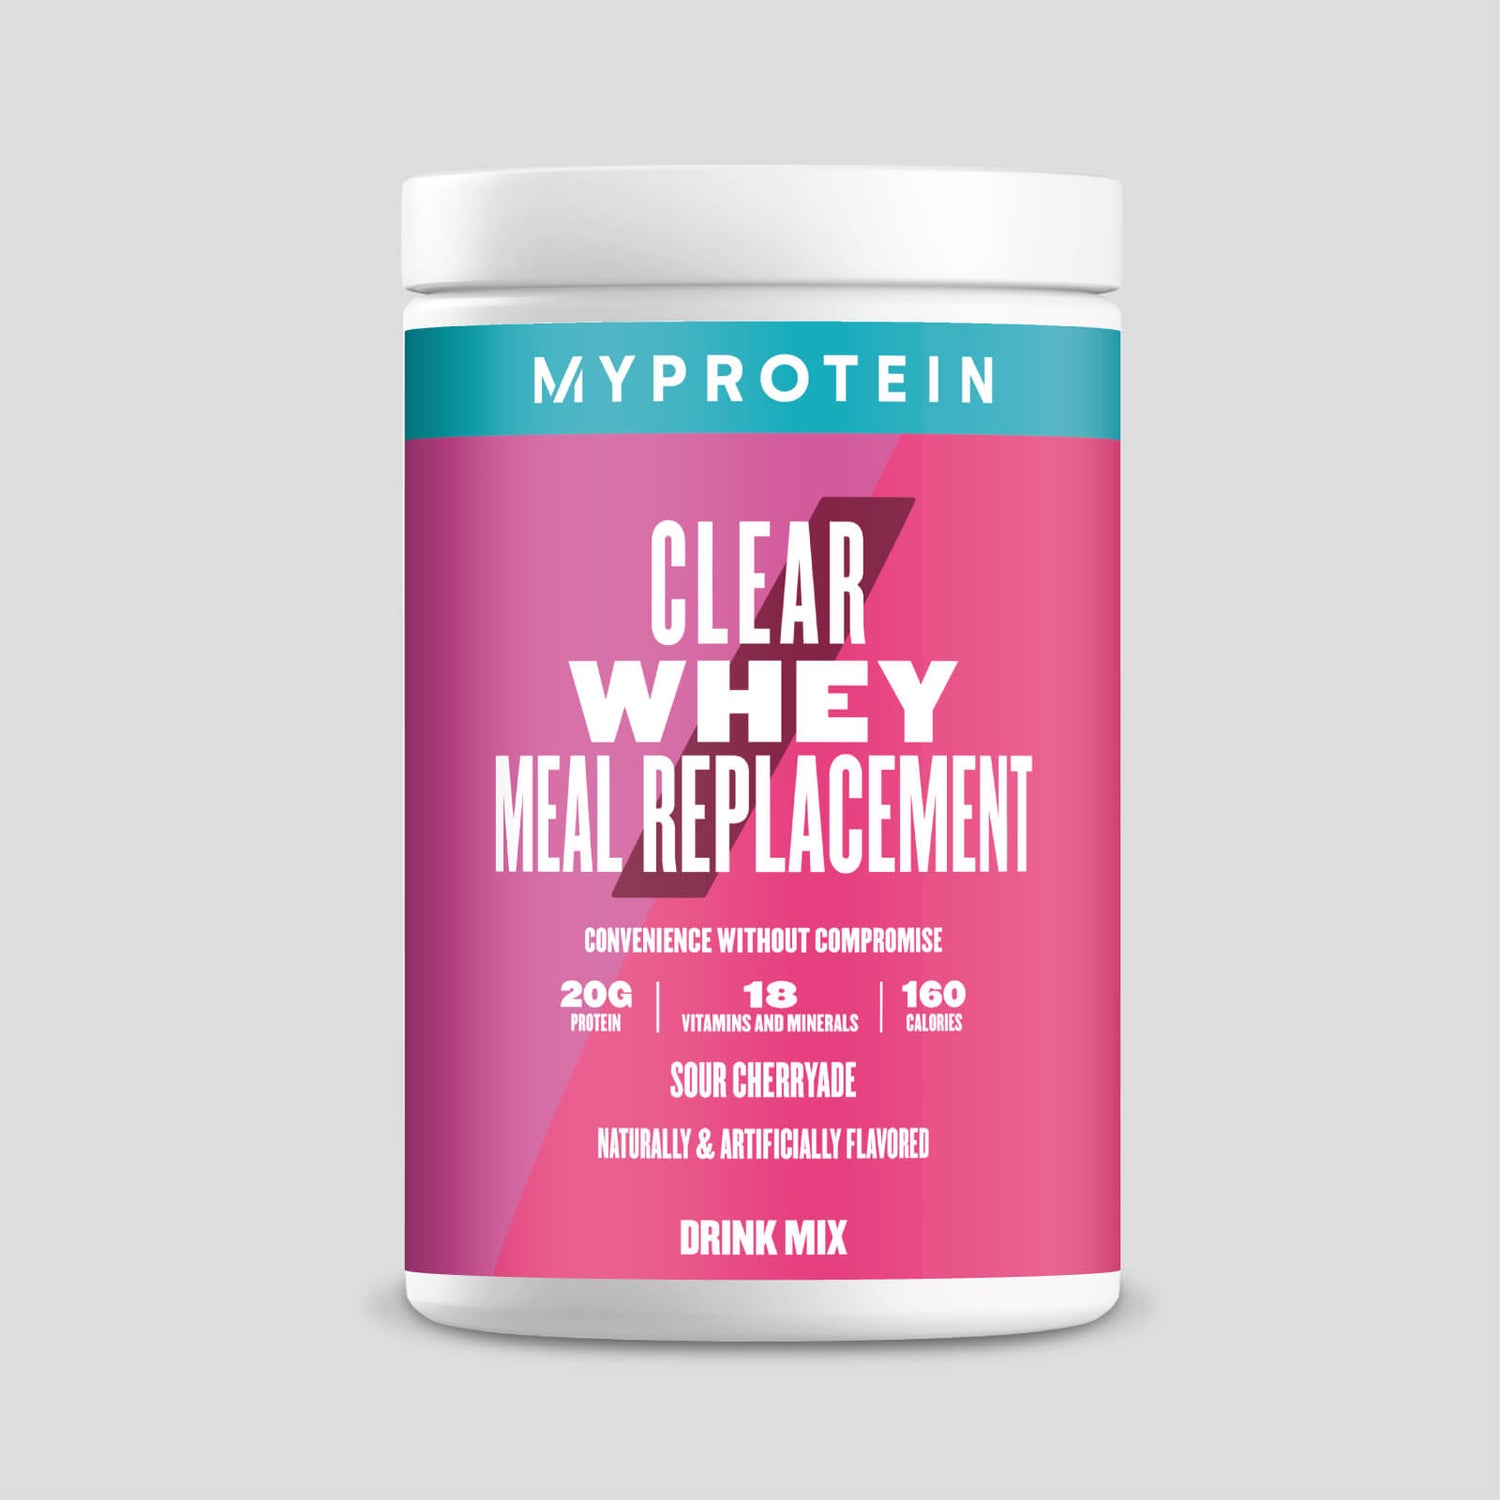 Myprotein Clear Meal (USA) - 1.44lb - Sour Cherryade